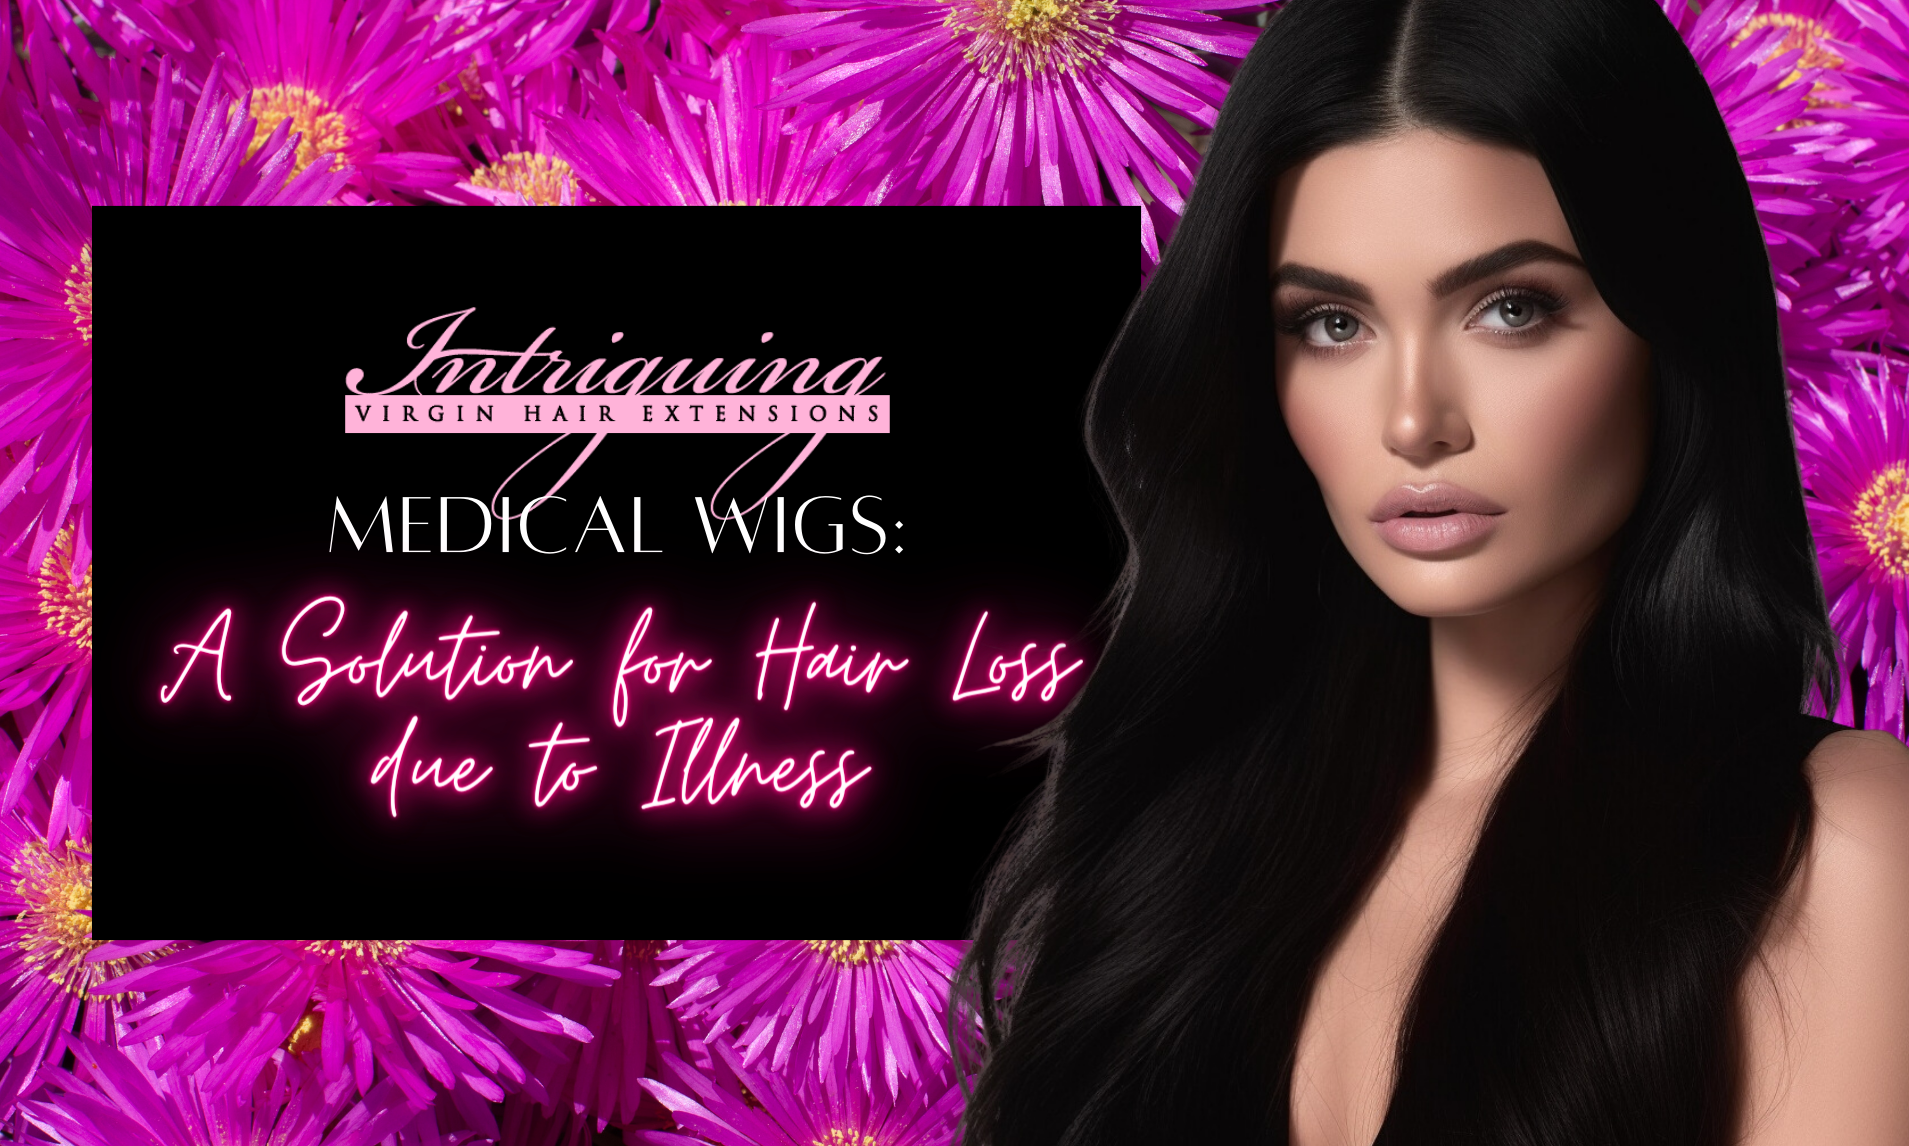 Medical Wigs: A Solution for Hair Loss due to Illness